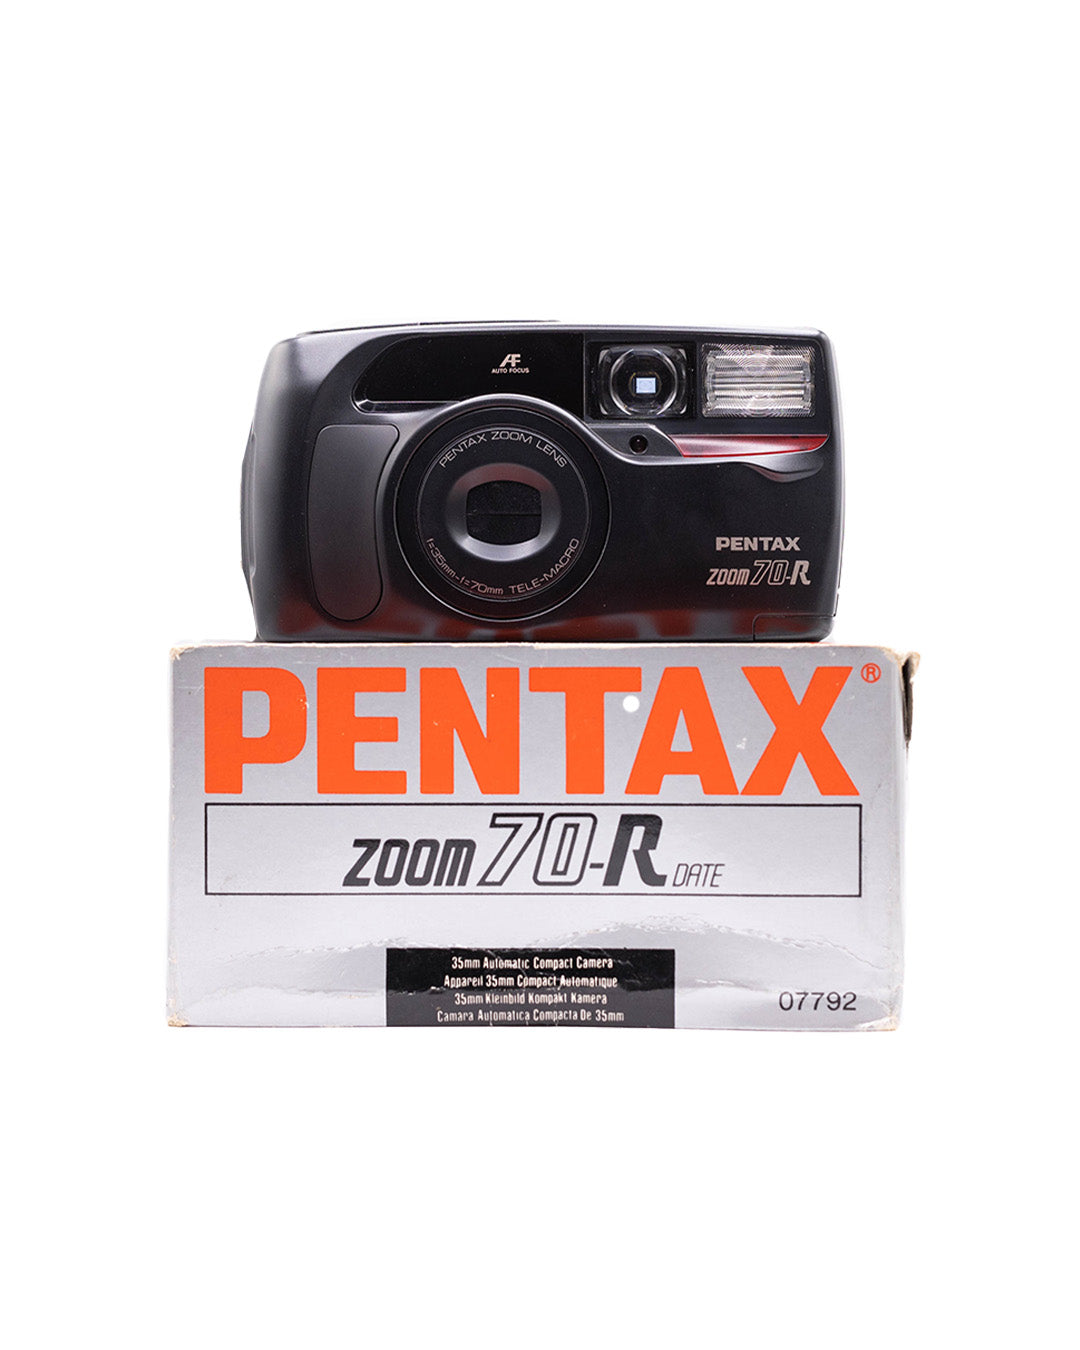 *NEW PENTAX ZOOM 70-R Point & Shoot Camera with 35-70mm lens f3.5-6.7